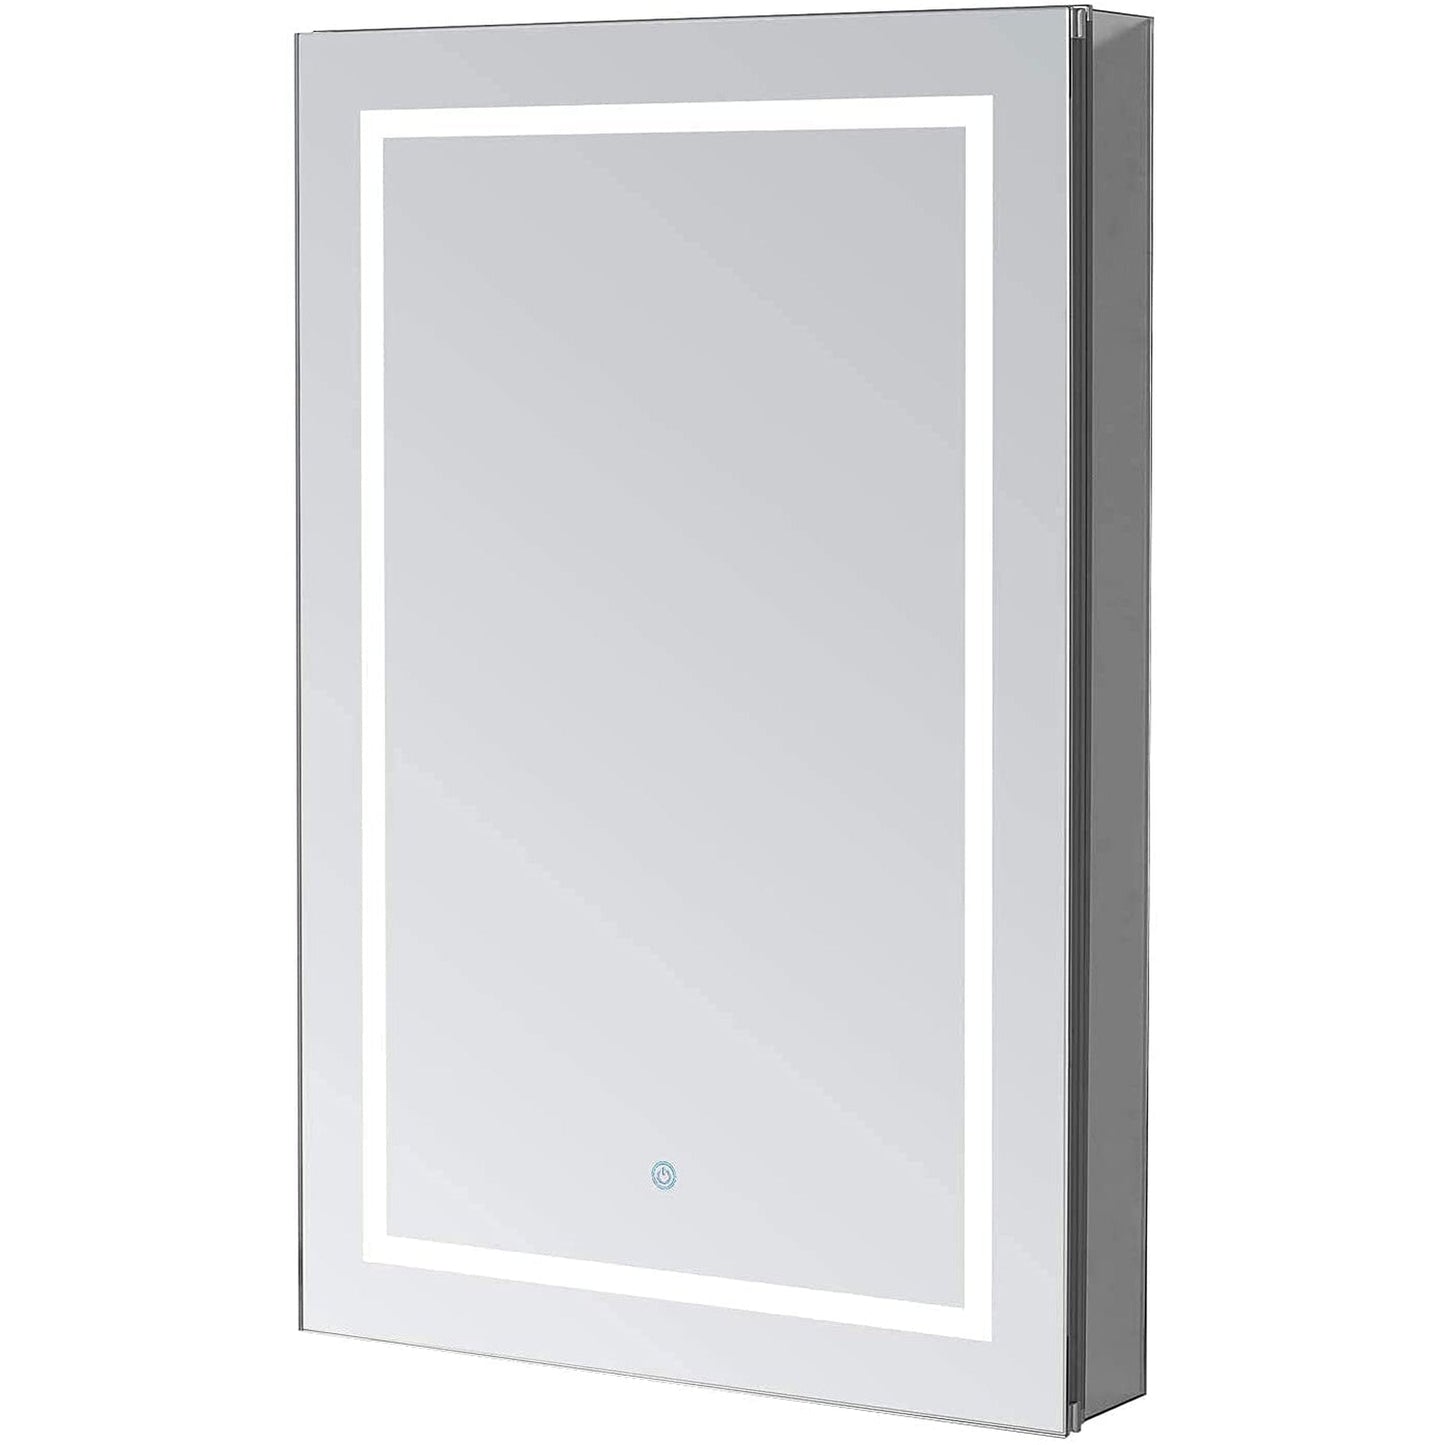 Aquadom Royale Plus 24" x 30" Extra Depth Rectangle Recessed or Surface Mount Single View Left Hinged LED Lighted Bathroom Medicine Cabinet With Defogger, Electrical Outlet, Magnifying Mirror